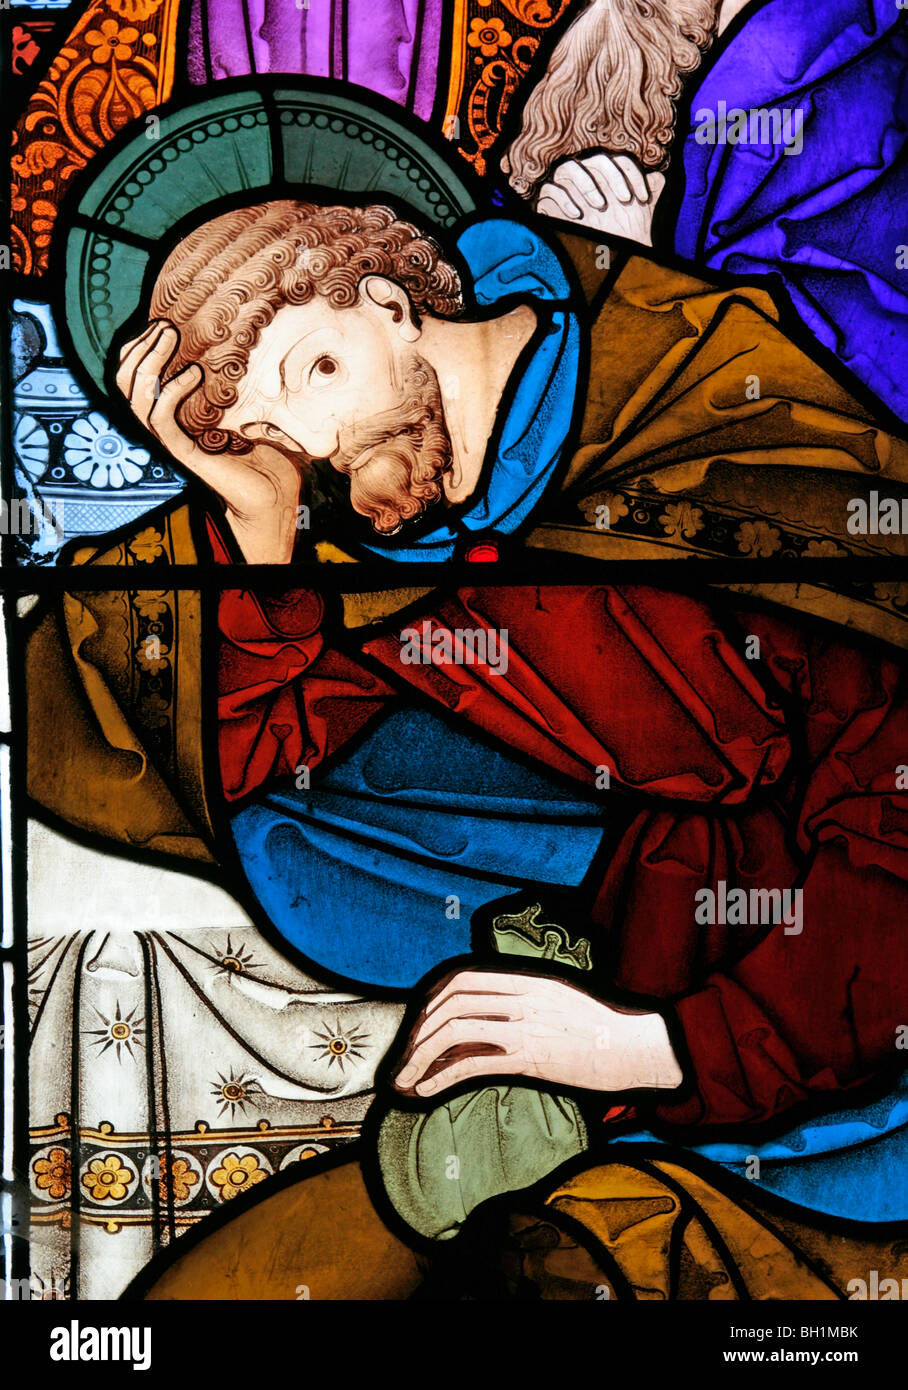 A stained glass window depicting Judas Iscariot at the Last Supper, All Saints Church, Allesley, Coventry Stock Photo